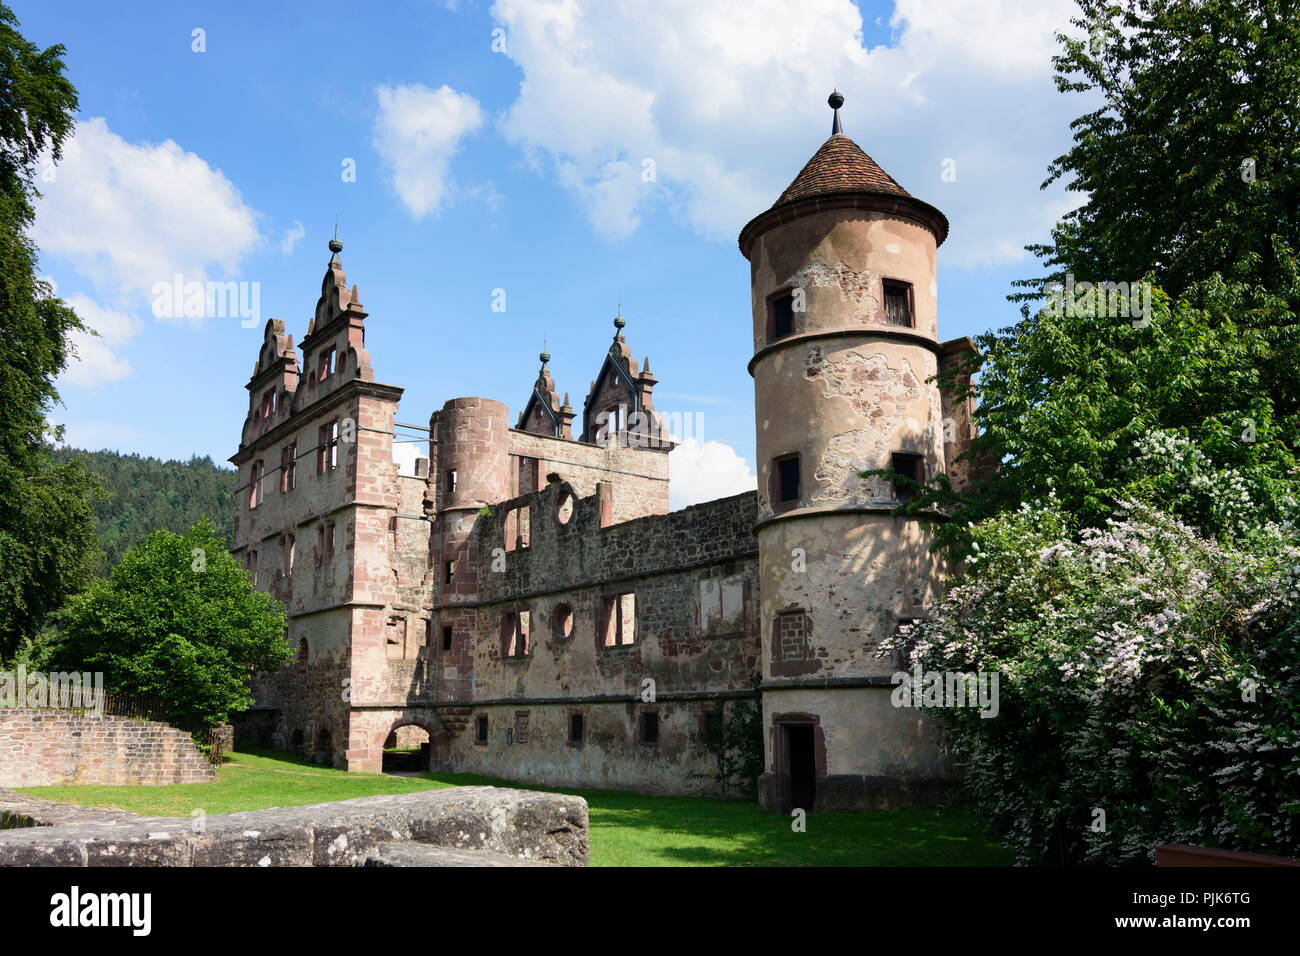 Calw, district Hirsau, ruins of Monastery of St. Peter and St. Paul, former Schloss (castle) in Germany, Baden-Württemberg, Schwarzwald, Black Forest Stock Photo